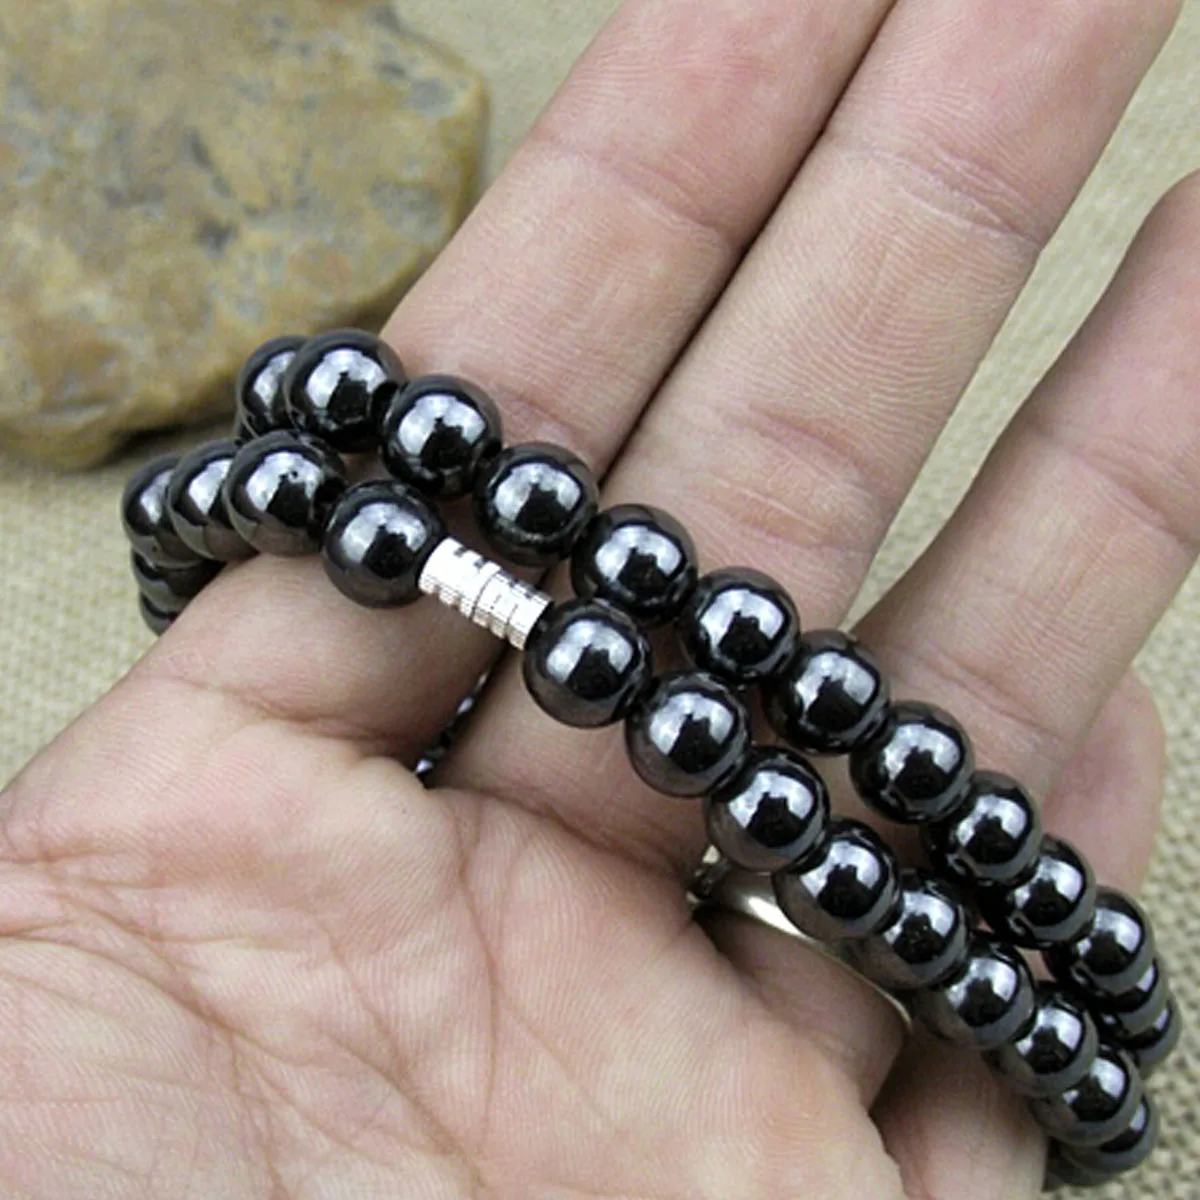 6/8mm Magnetic hematite beads necklaces vintage round black bead health care necklace choker for women men jewelry gift